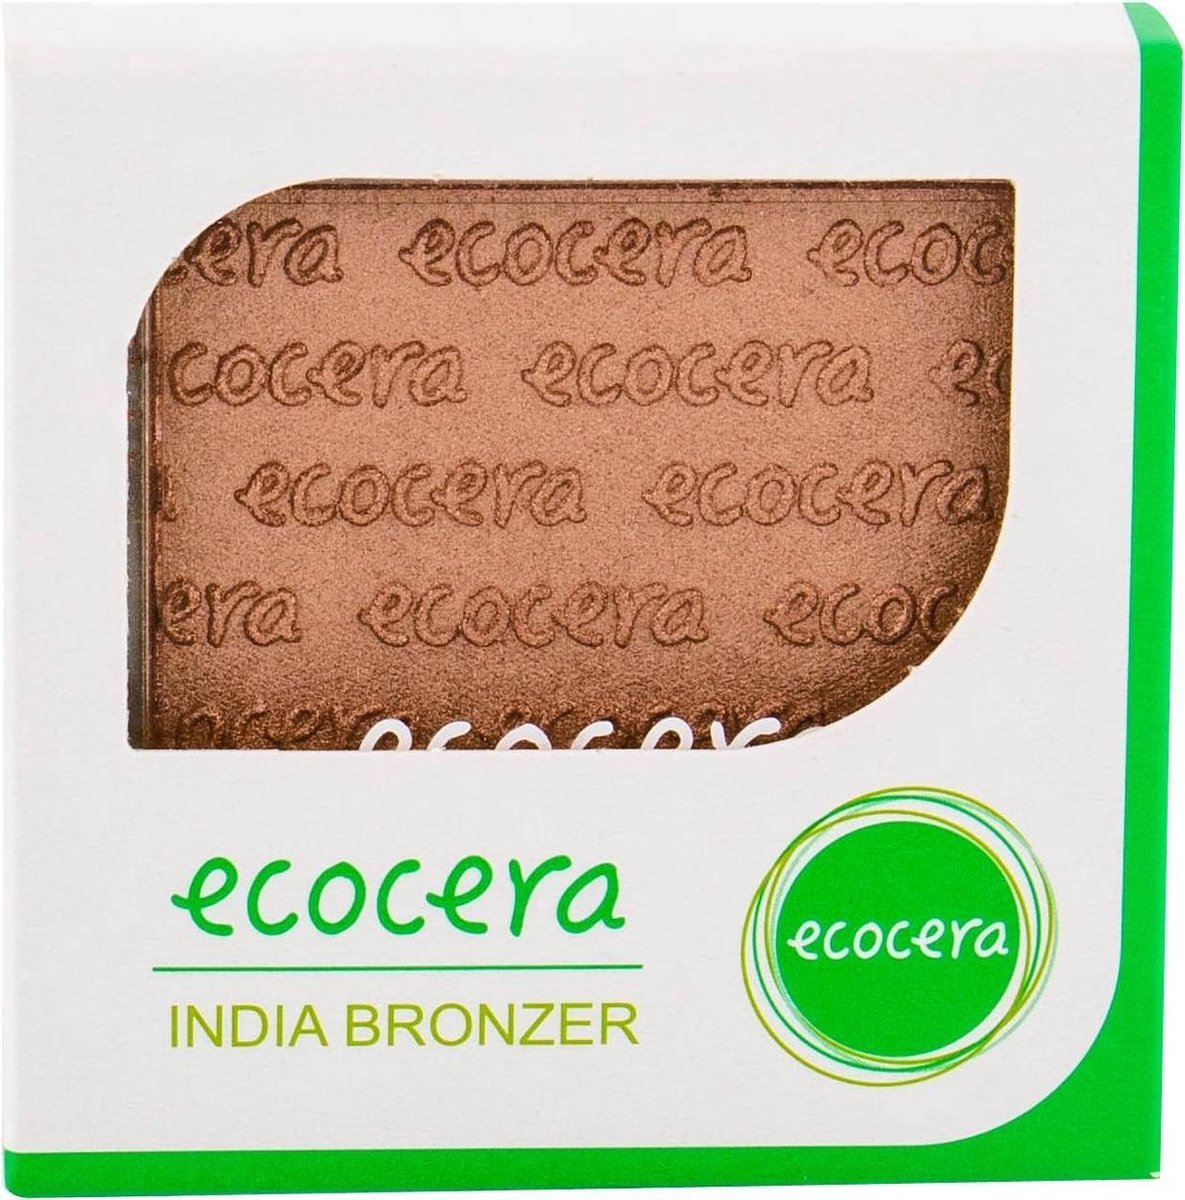 Ecocera - Bronzer - Bronzer For A Naturally Tanned Look 10 G India